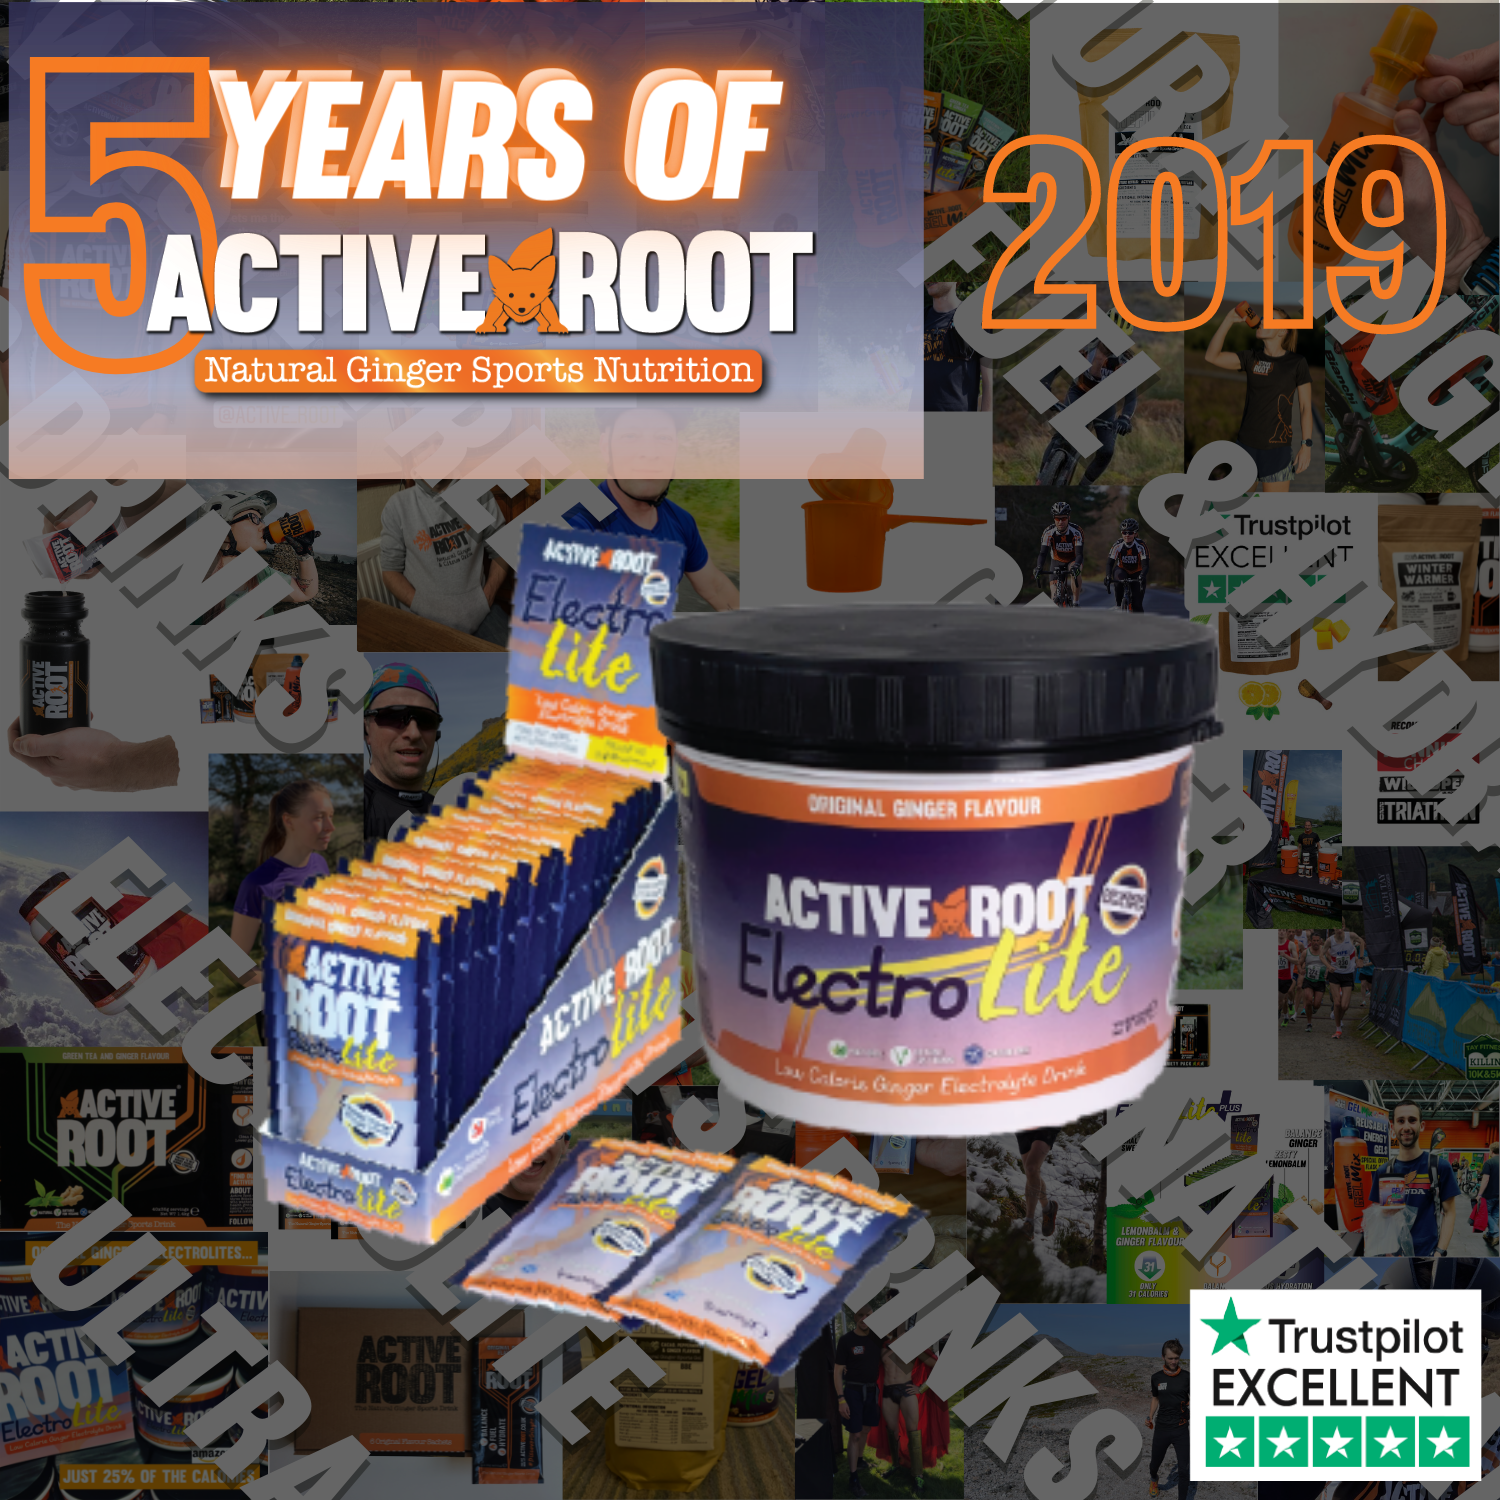 5 years of Active Root - 2019